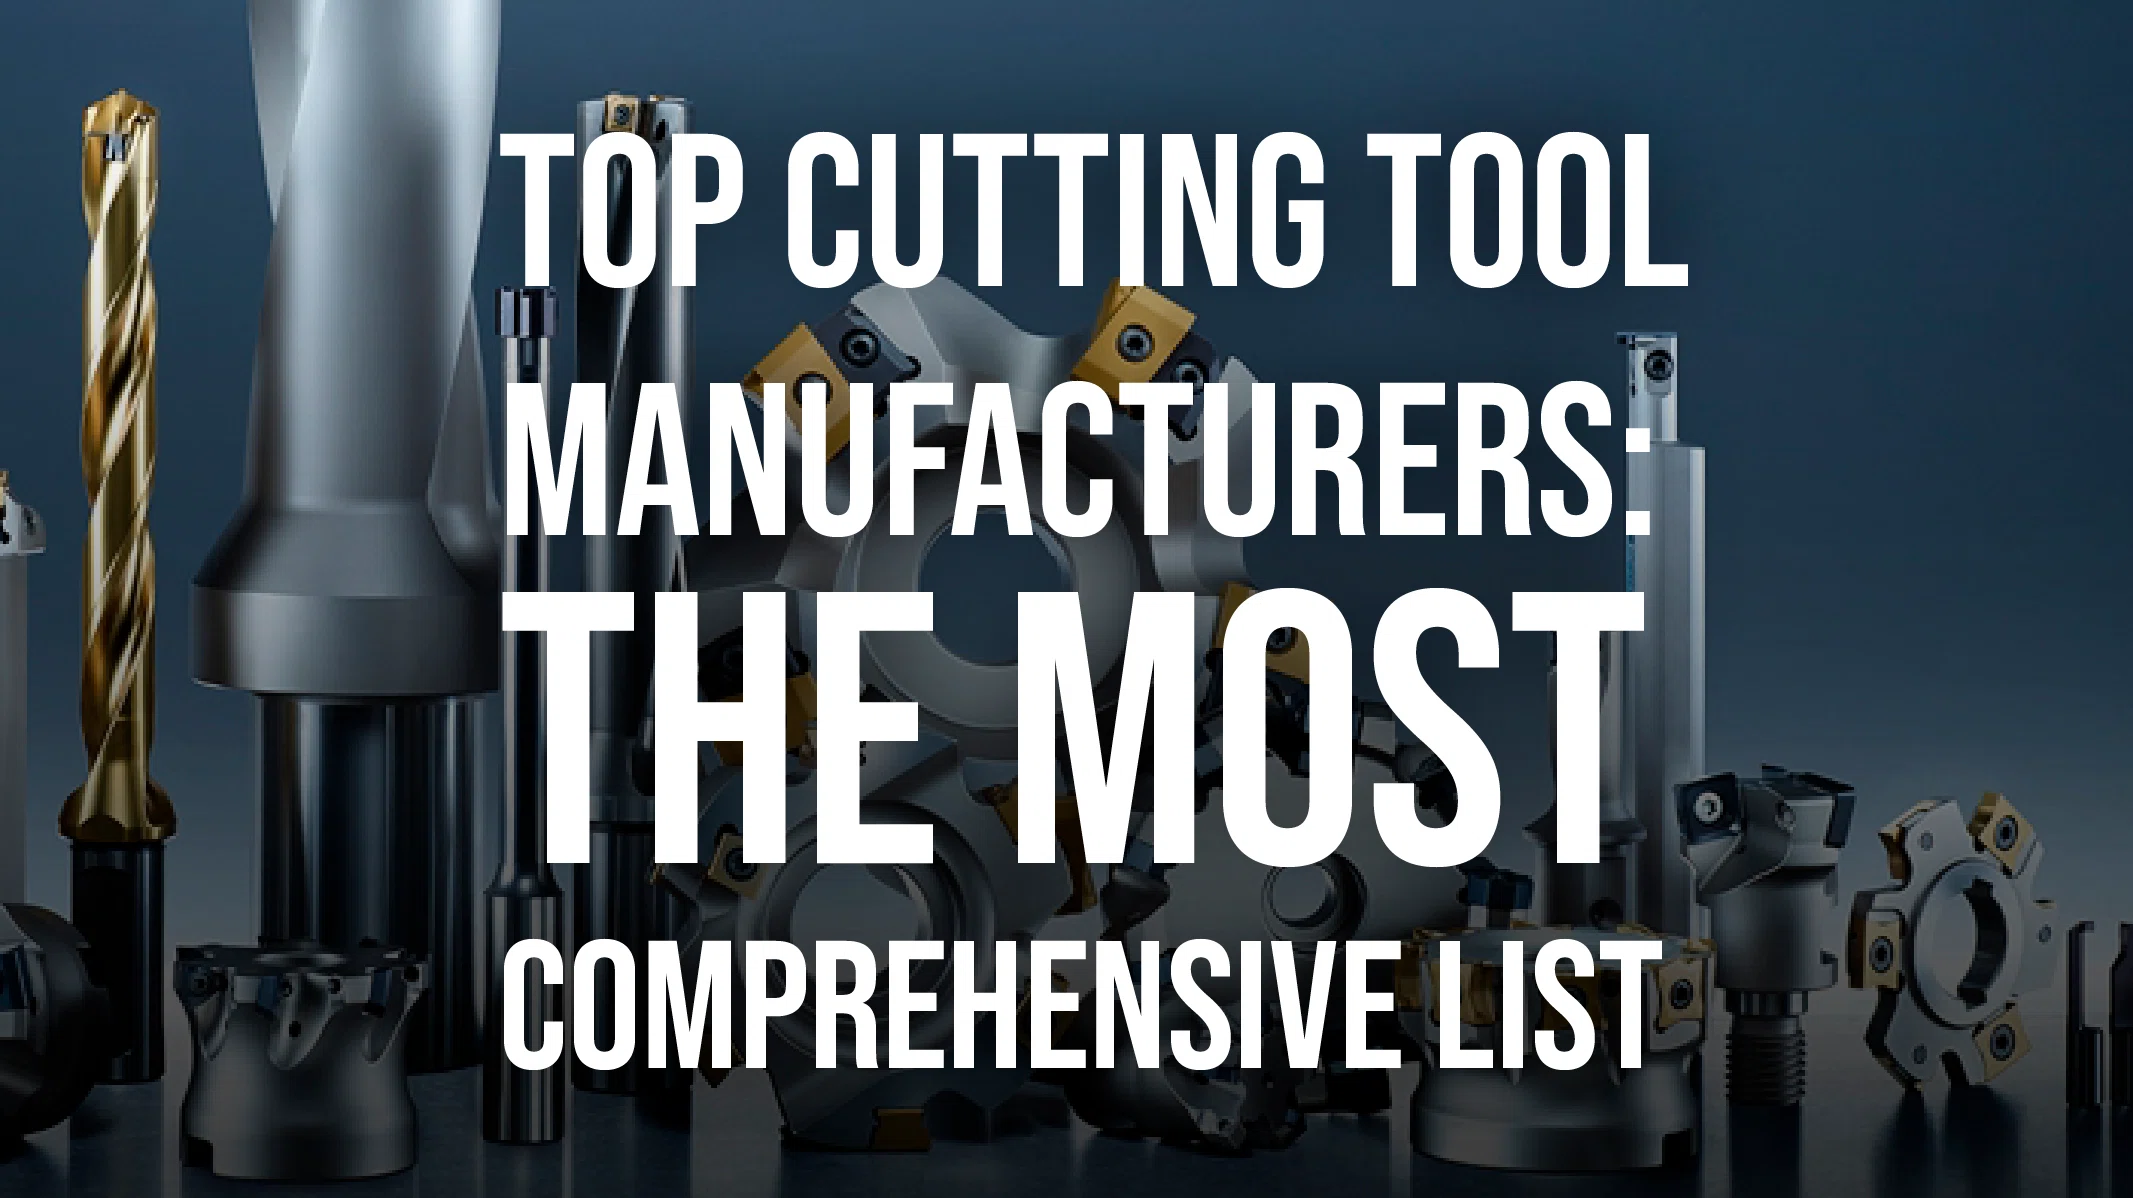 Top Cutting Tool Manufacturers: The Most Comprehensive List